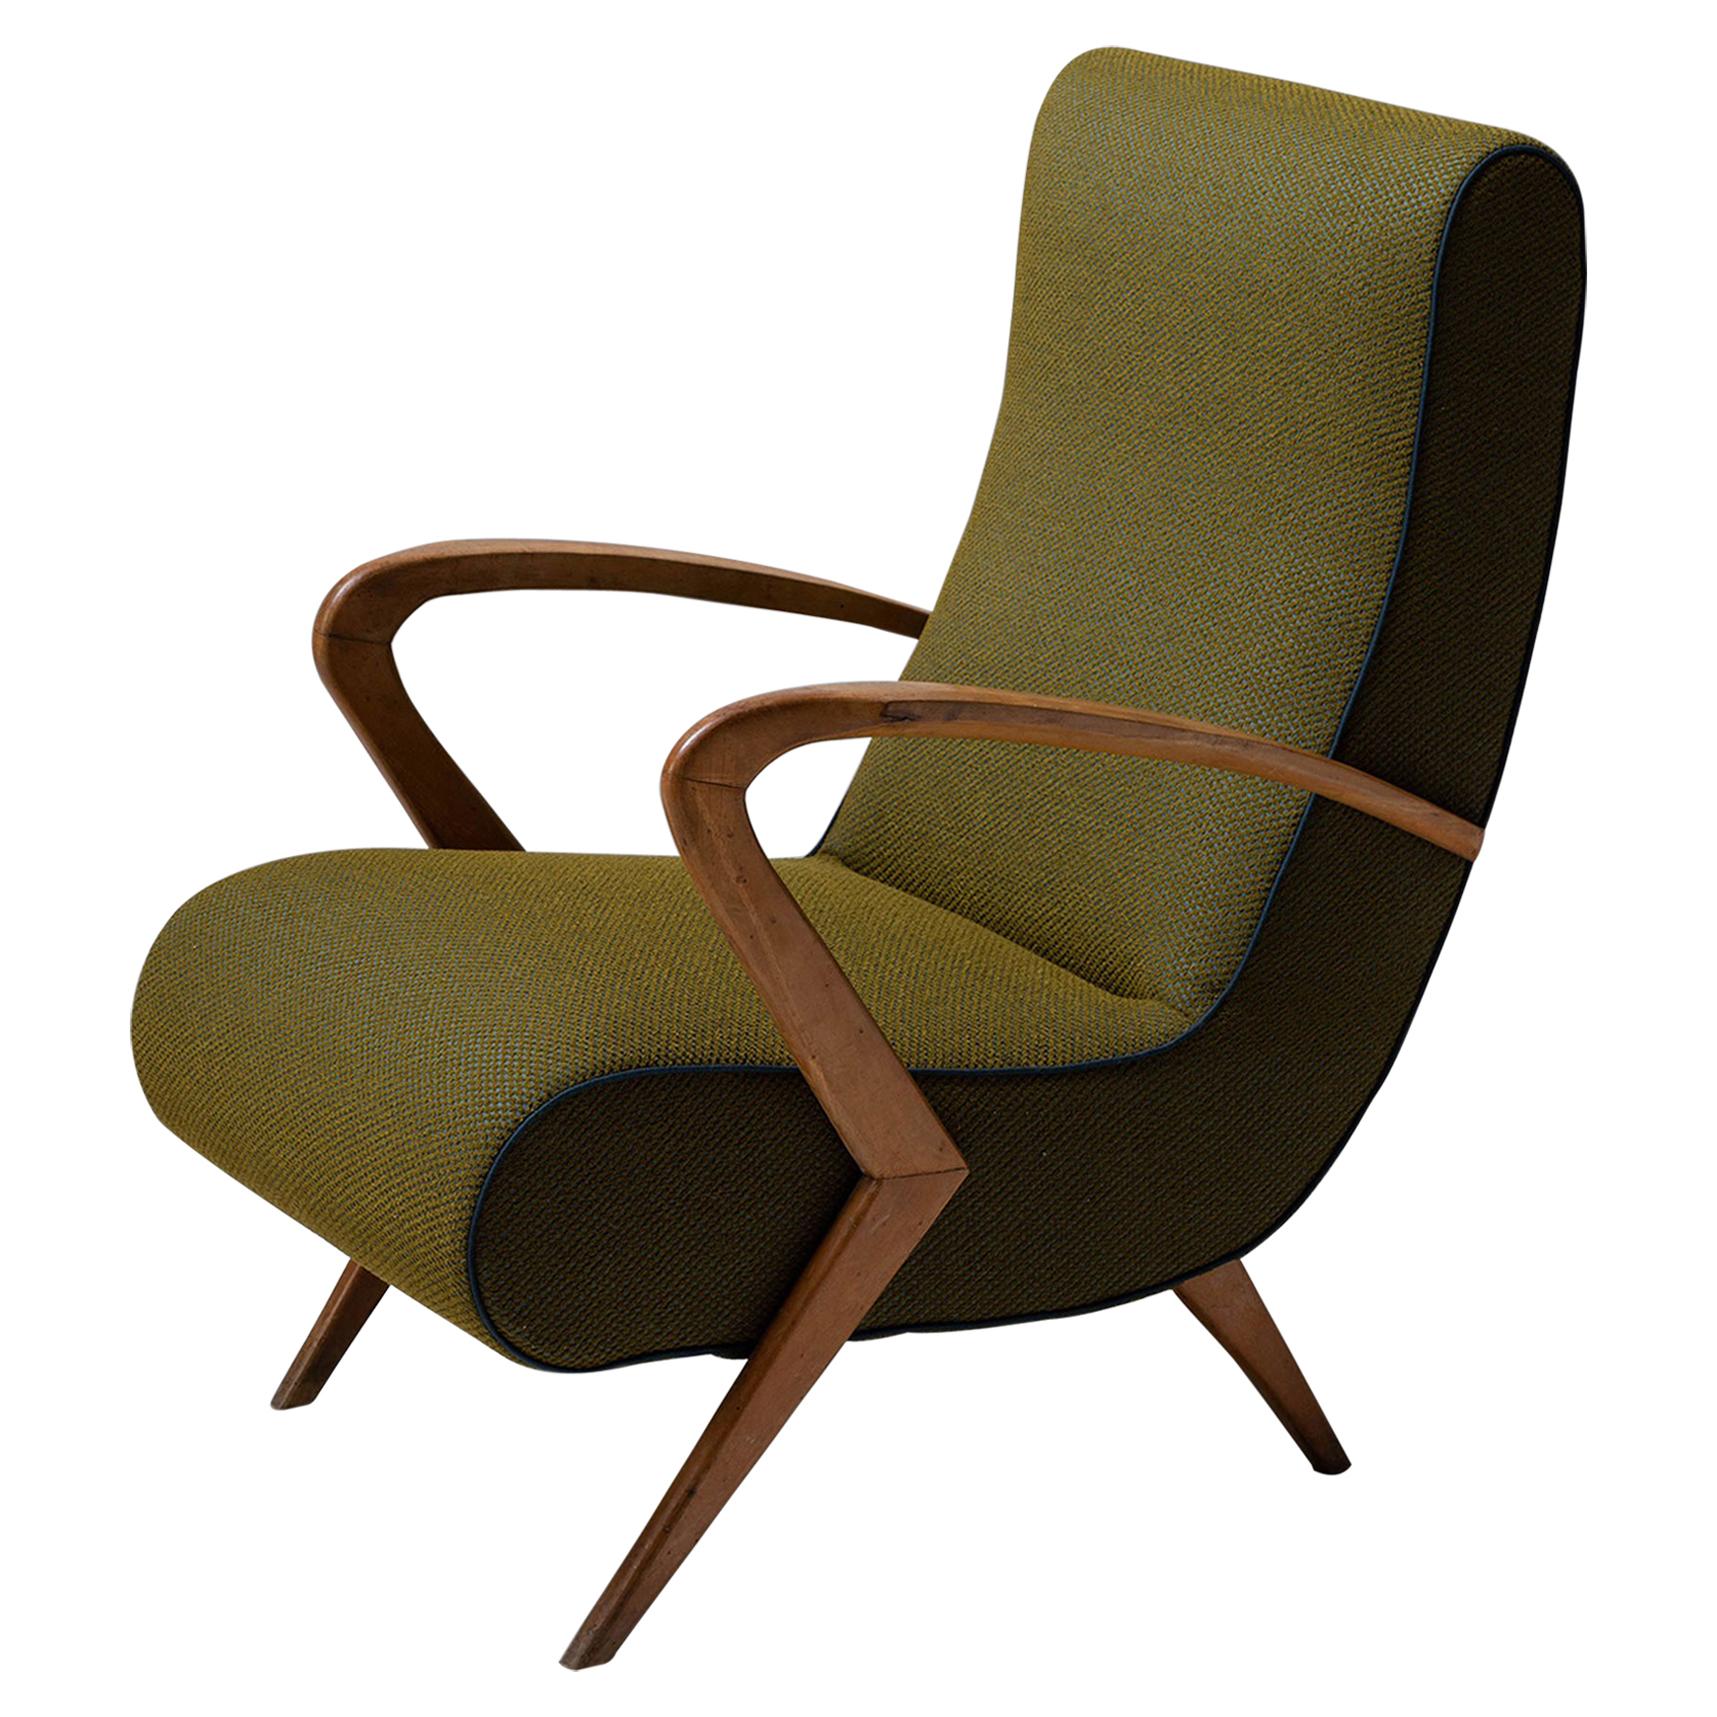 Italian Armchair in Two-Tone Polyester Fabric by Maharam